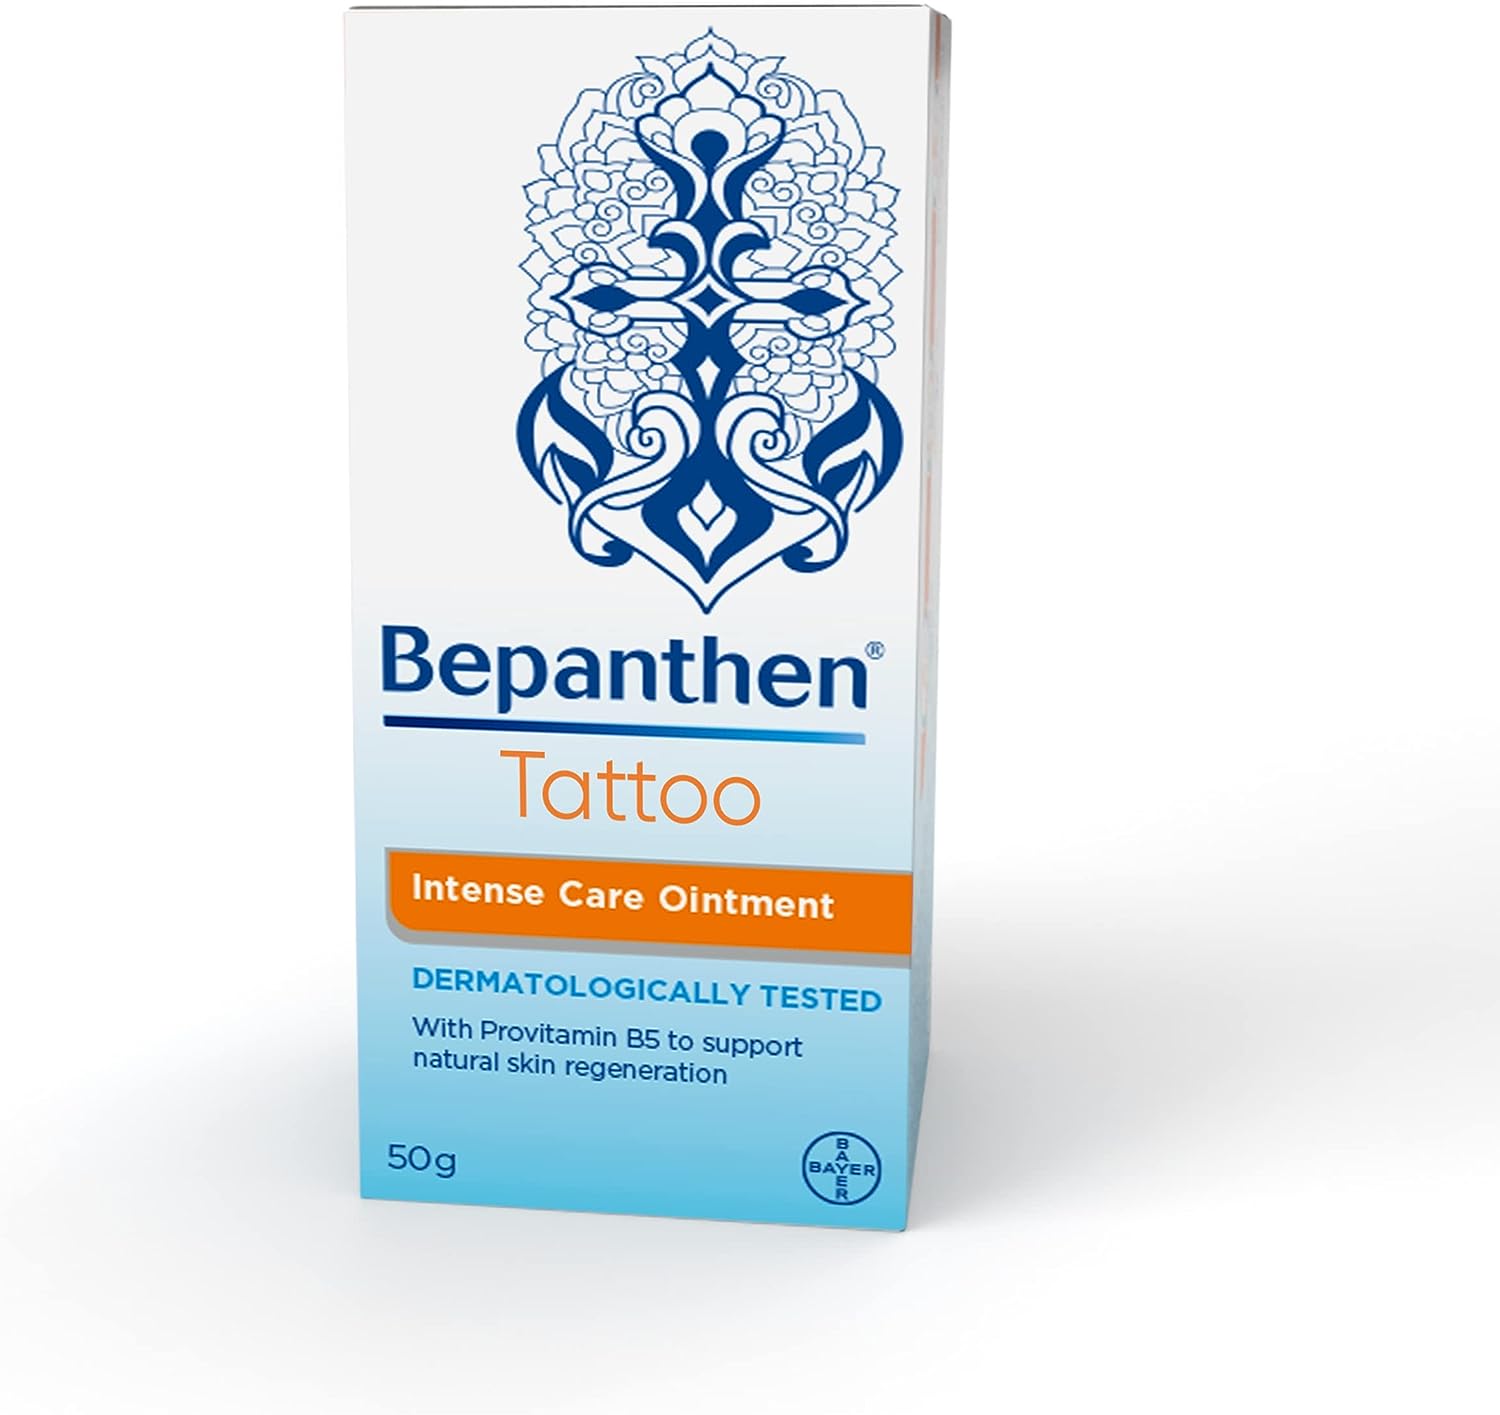 Bepanthen Tattoo Intense Care Ointment   